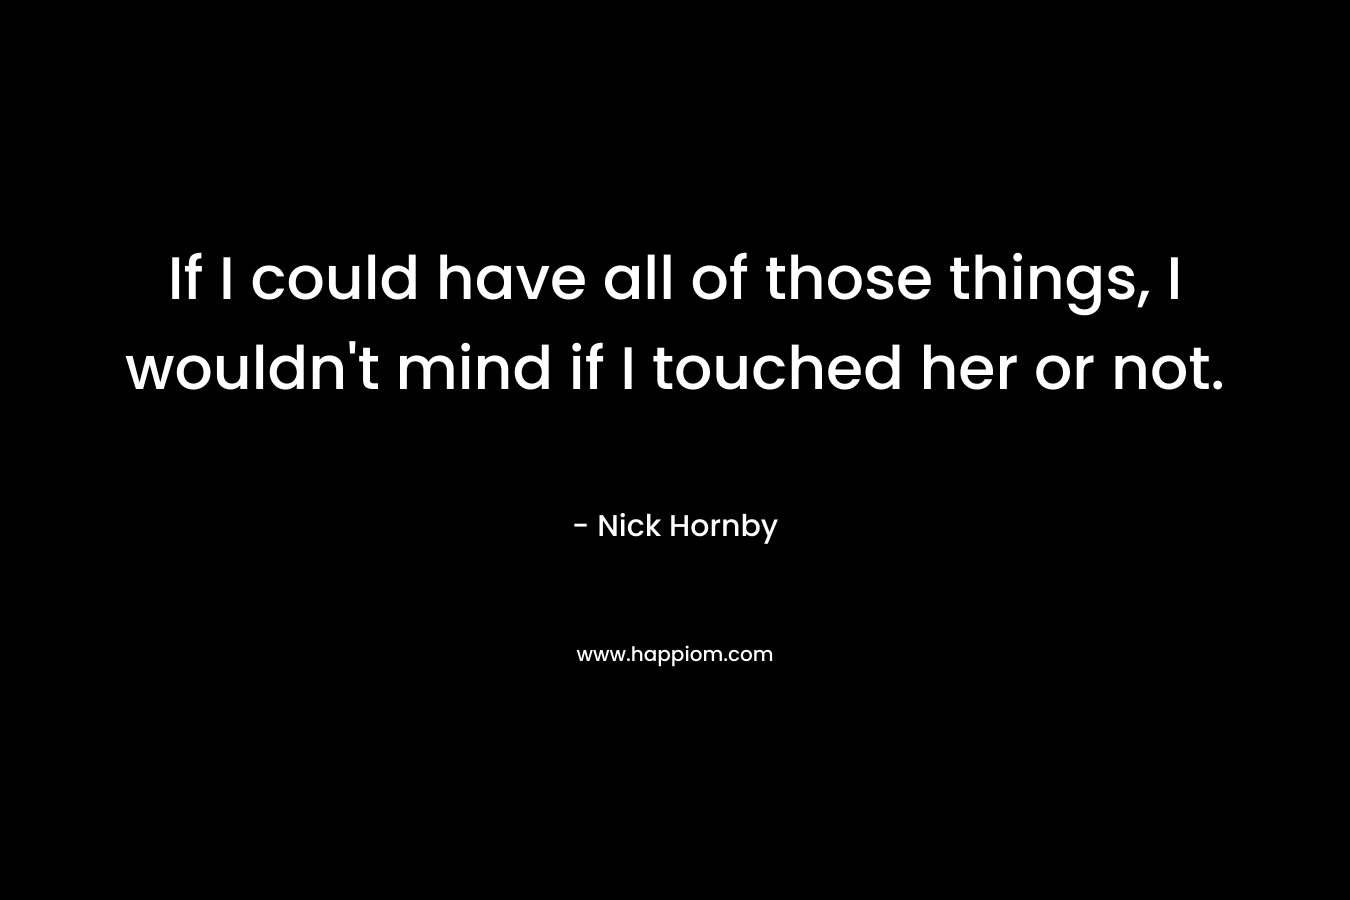 If I could have all of those things, I wouldn’t mind if I touched her or not. – Nick Hornby